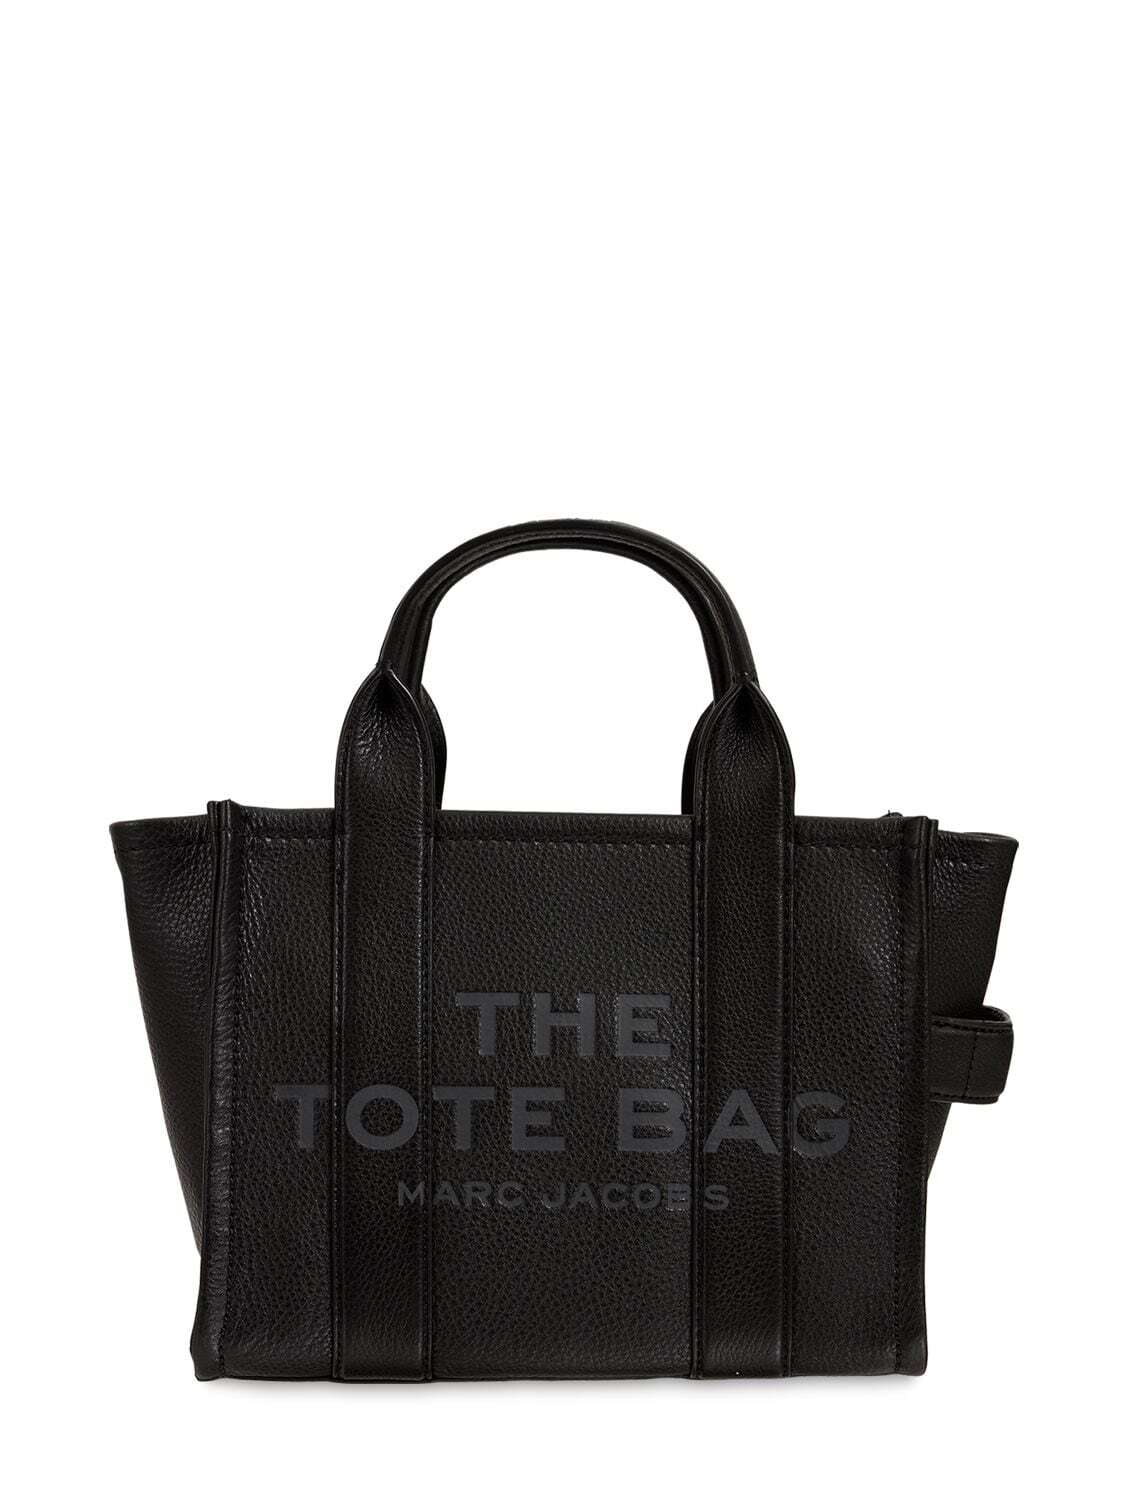 MARC JACOBS (THE) Mini Traveler Leather Tote Bag in black